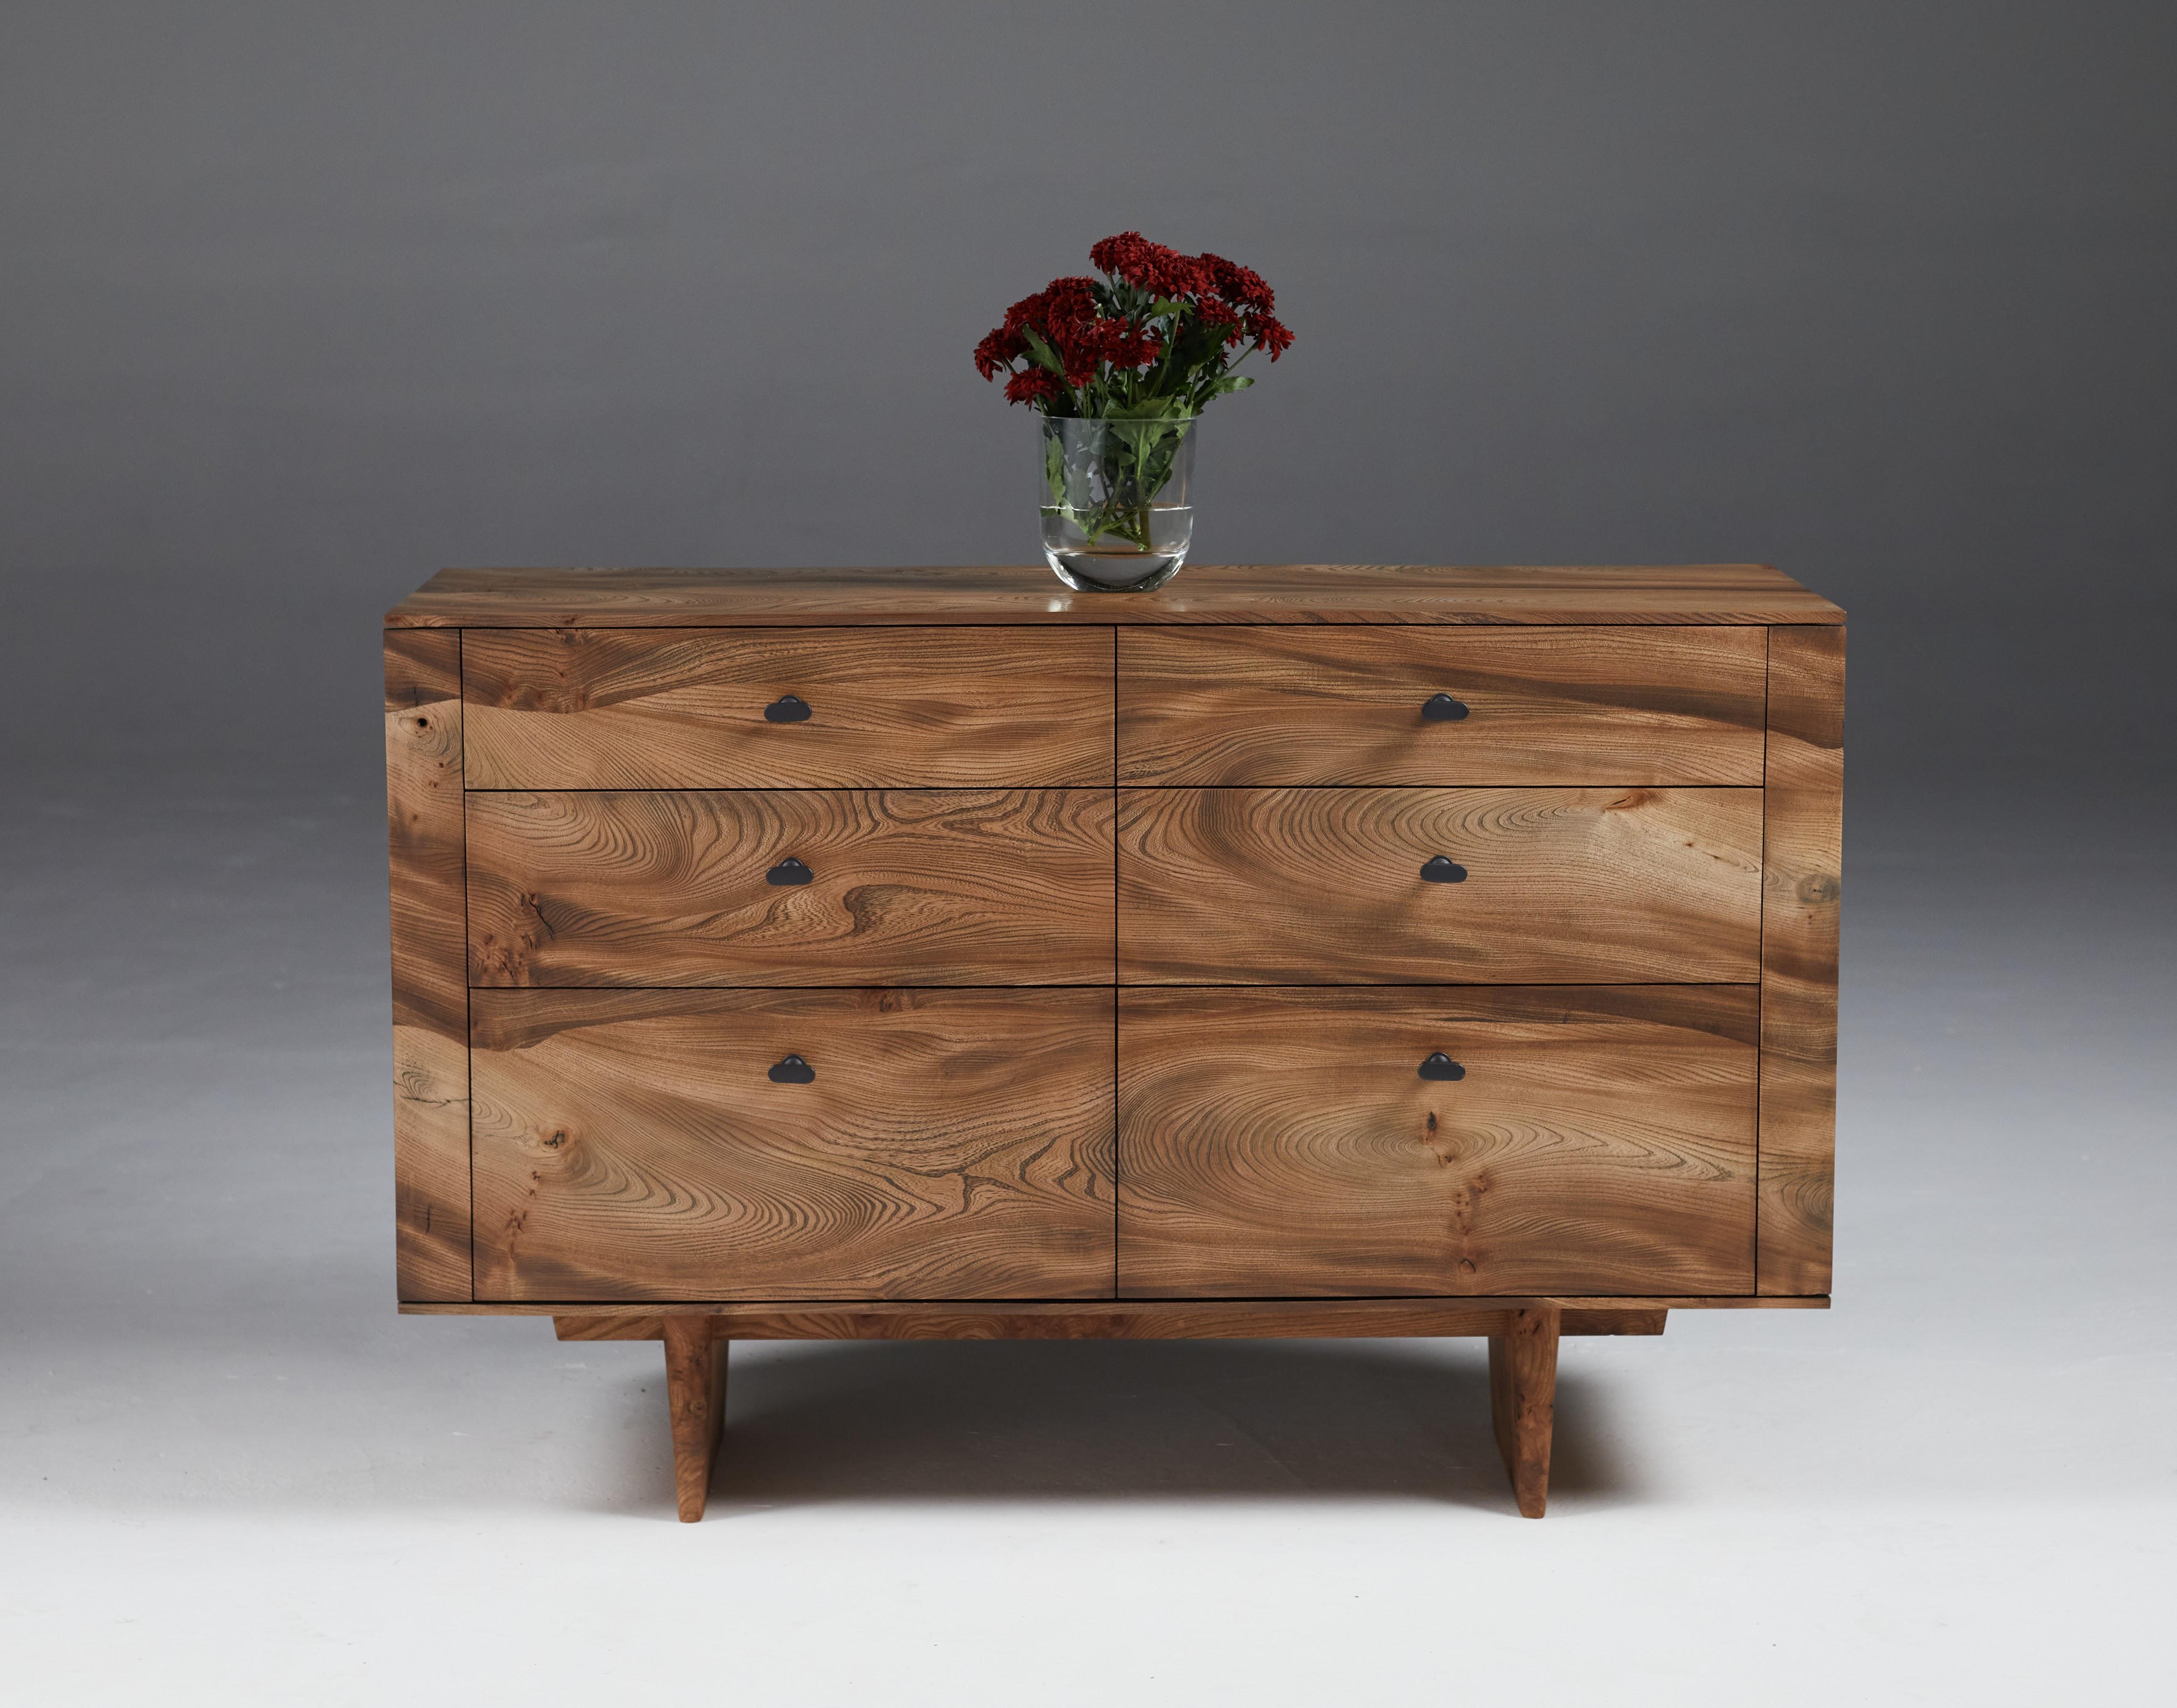 Chest of Drawers in Scottish elm. 

Size:  1220 mm  L x 400 mm W x 795 mm high.
With bronze drawer pulls, oak internal drawer boxes of solid oak and fully extendable soft close runners. 
Made in January 2023, The consecutive project number 332 and